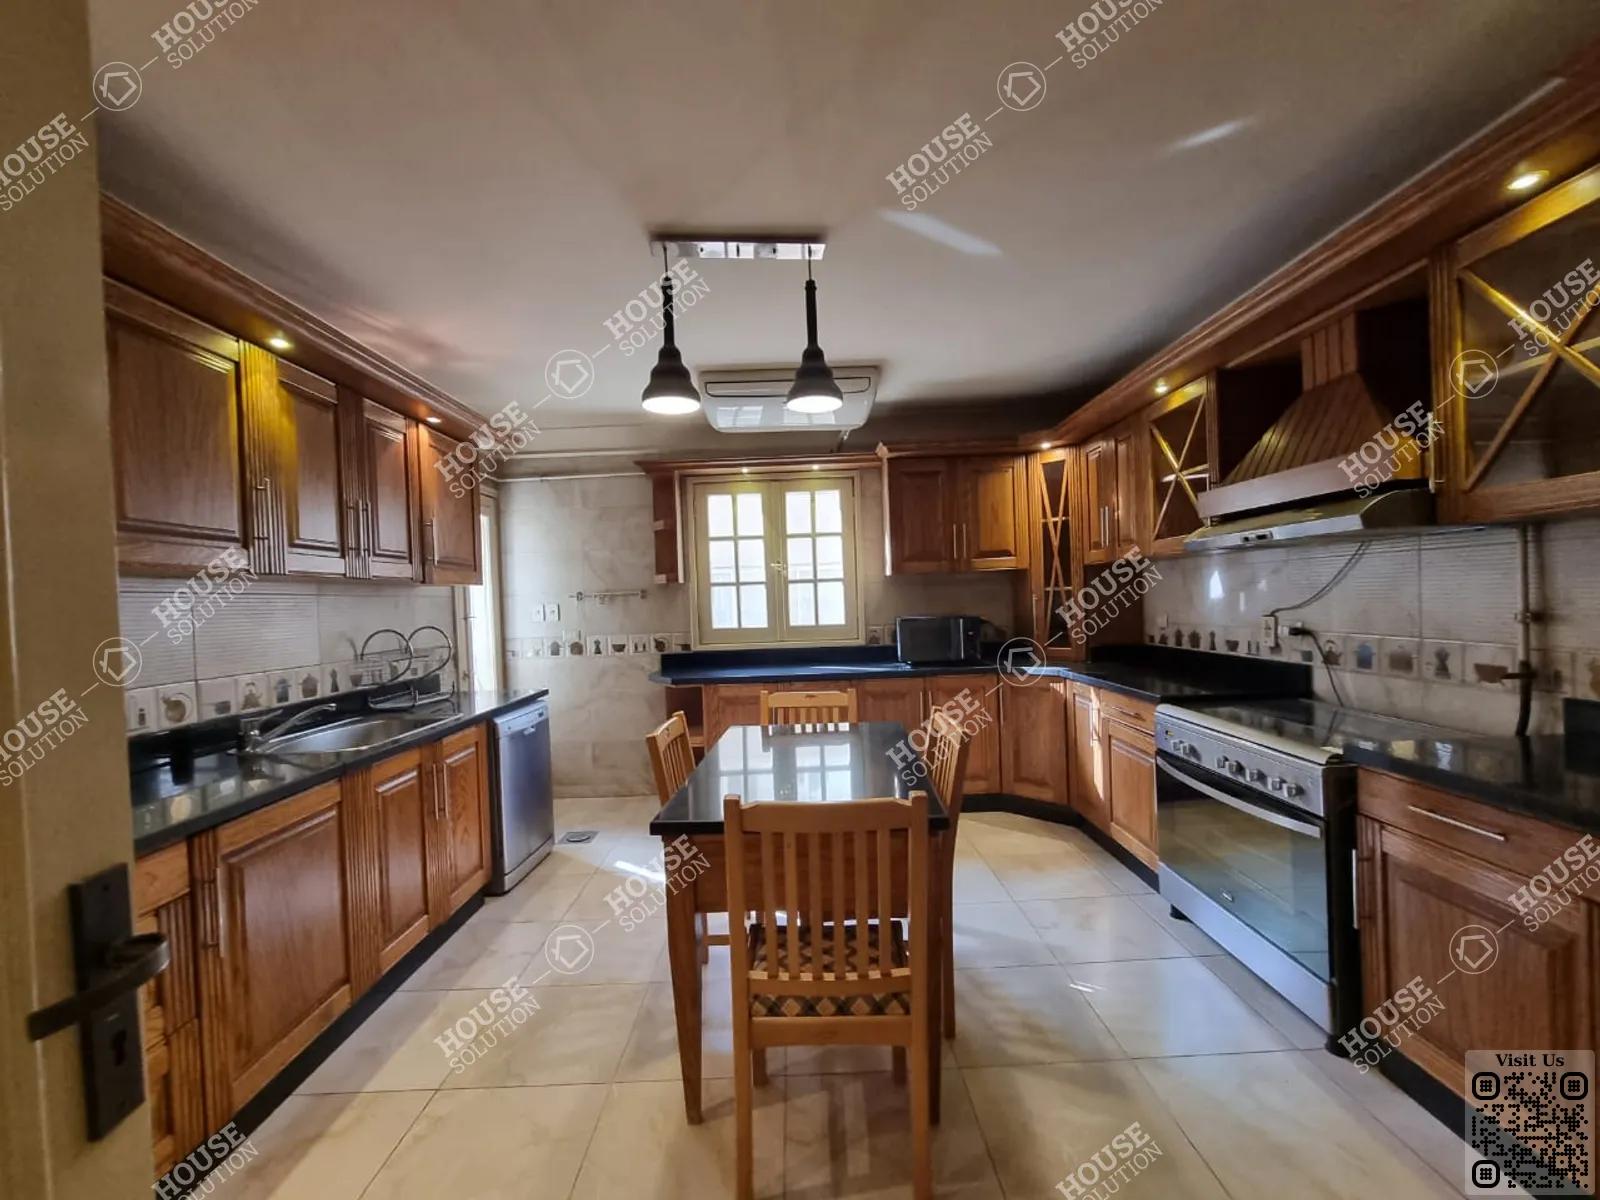 KITCHEN  @ Apartments For Rent In Maadi Maadi Sarayat Area: 350 m² consists of 4 Bedrooms 3 Bathrooms Modern furnished 5 stars #5423-1